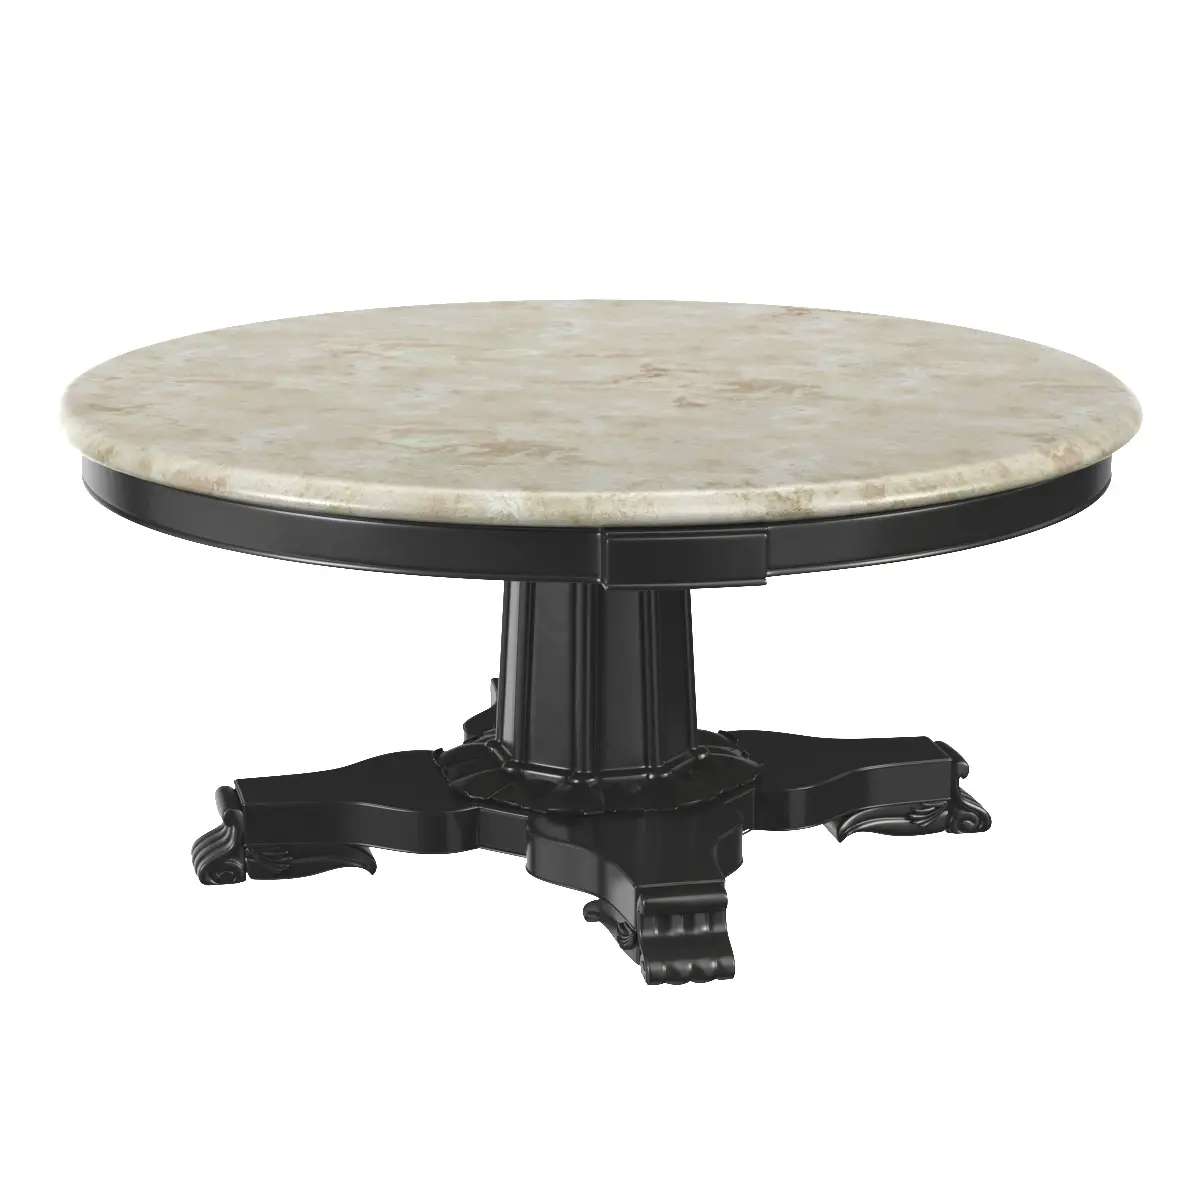 Anglo-Indian Marble and Ebonized Mahogany Centre Table 3D Model_01